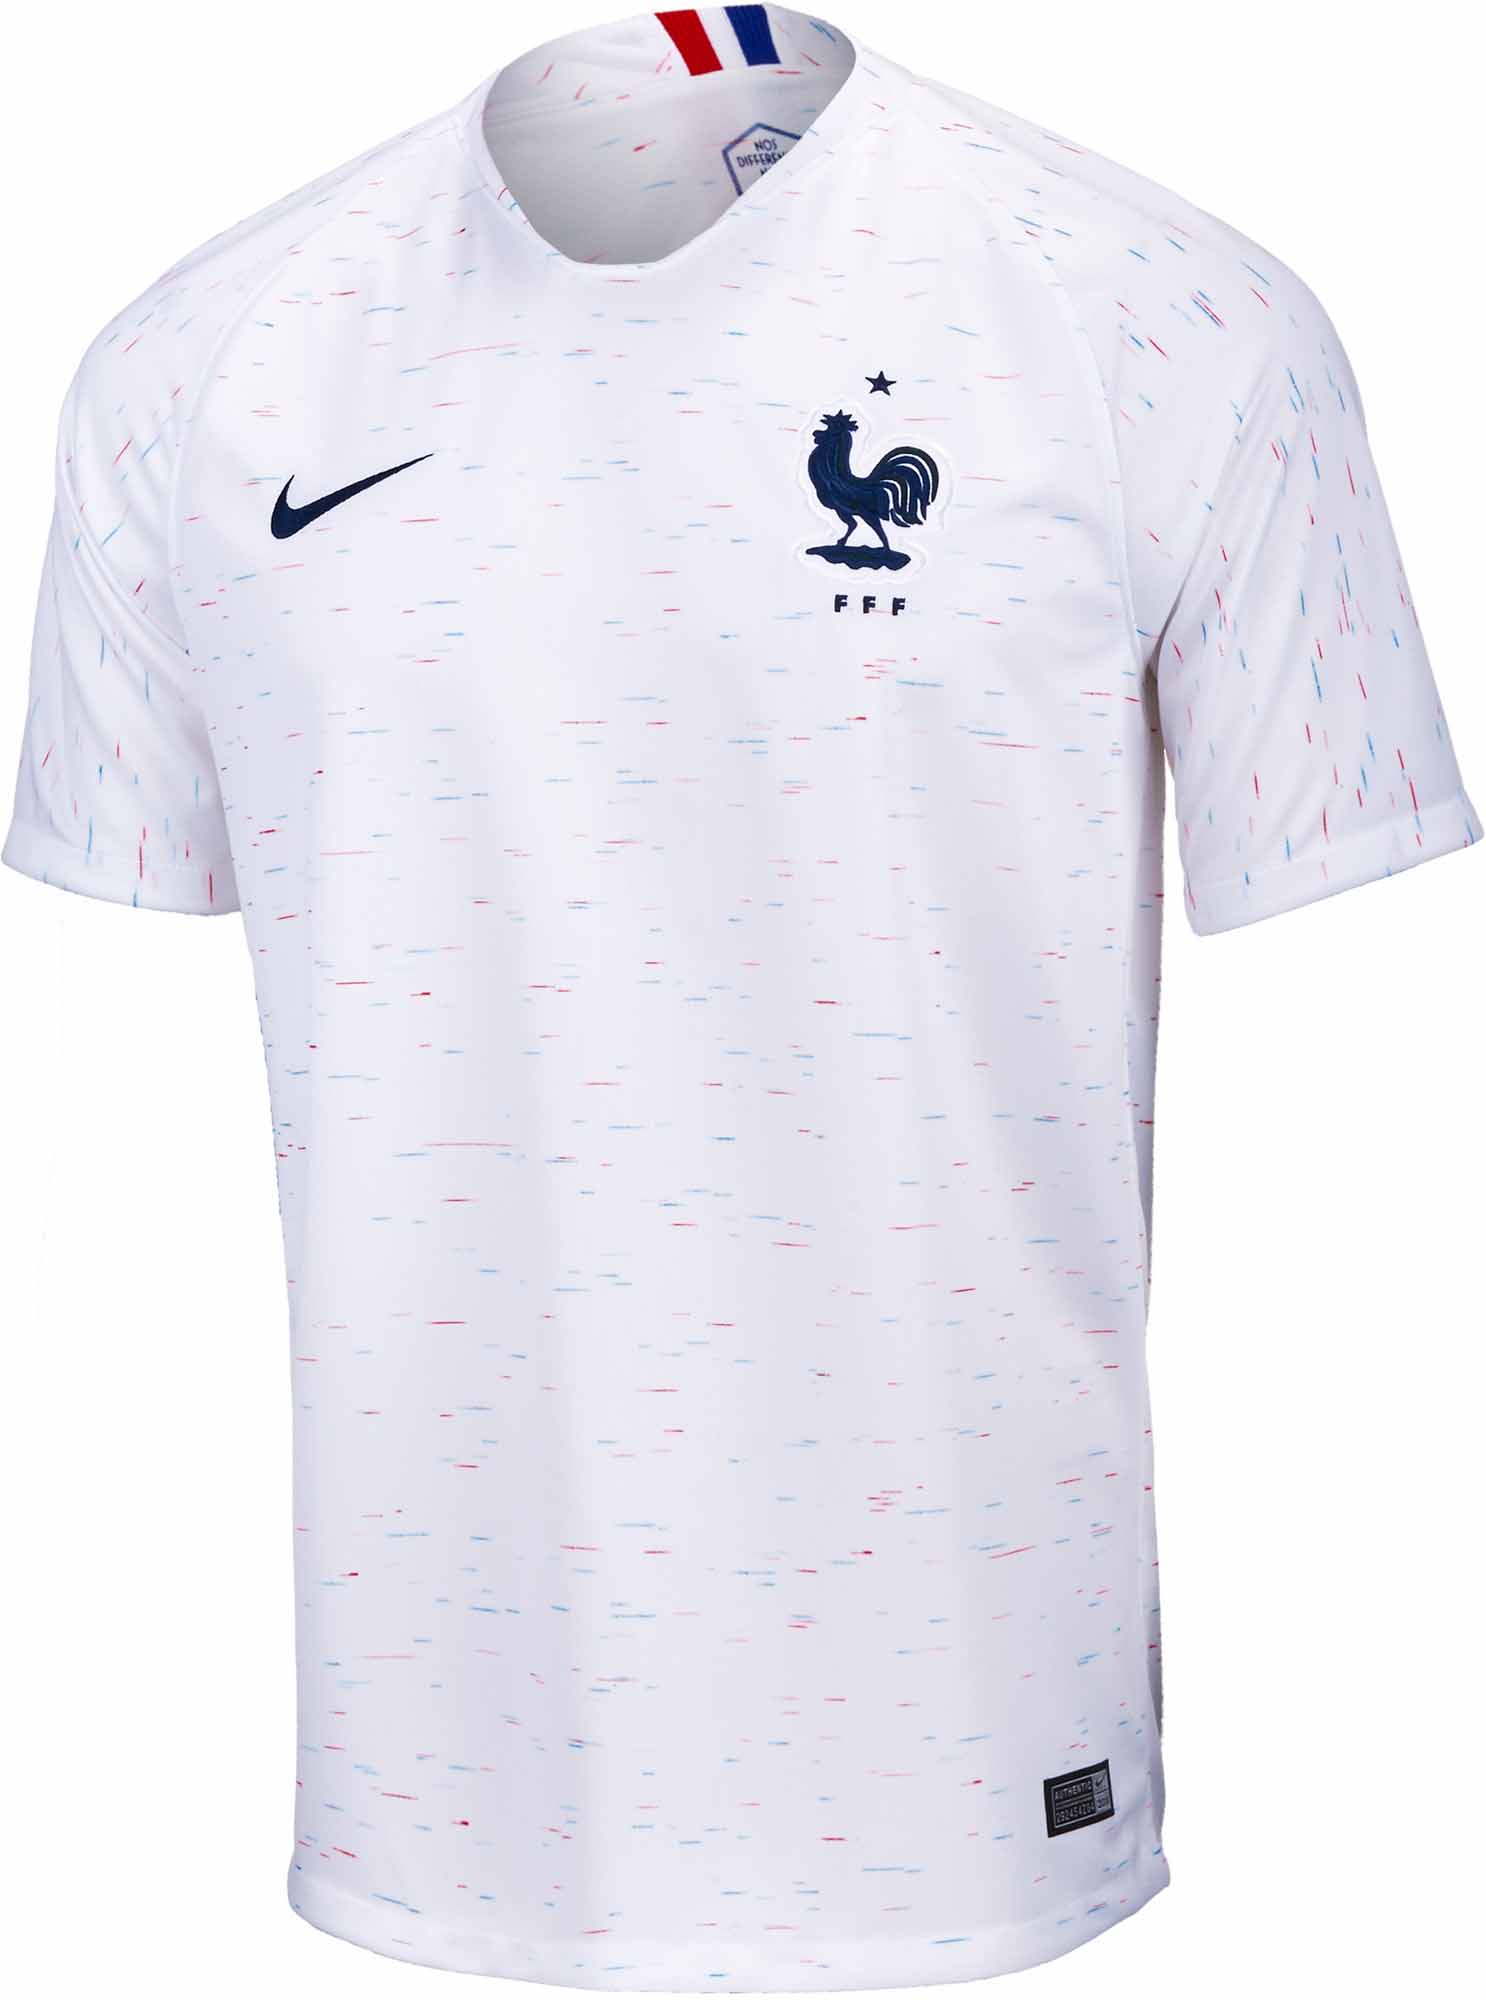 france white jersey 2018 world cup